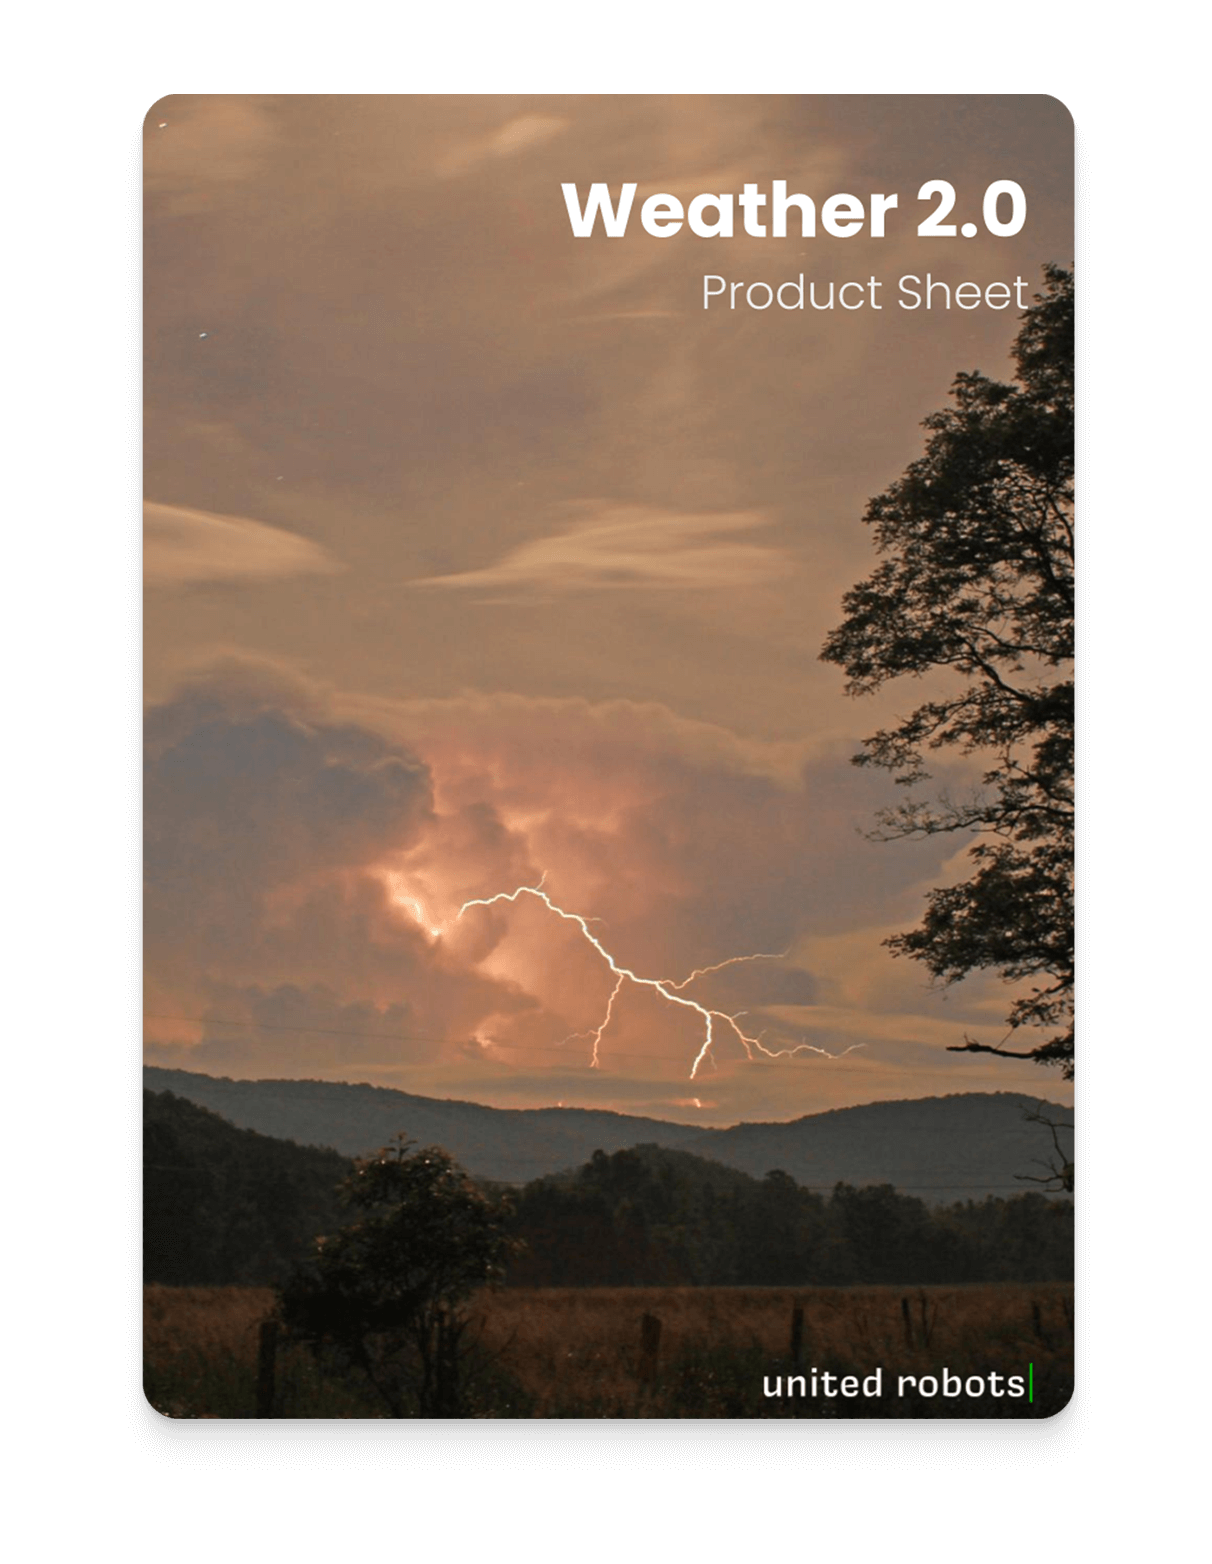 Global-weather2.0-cover